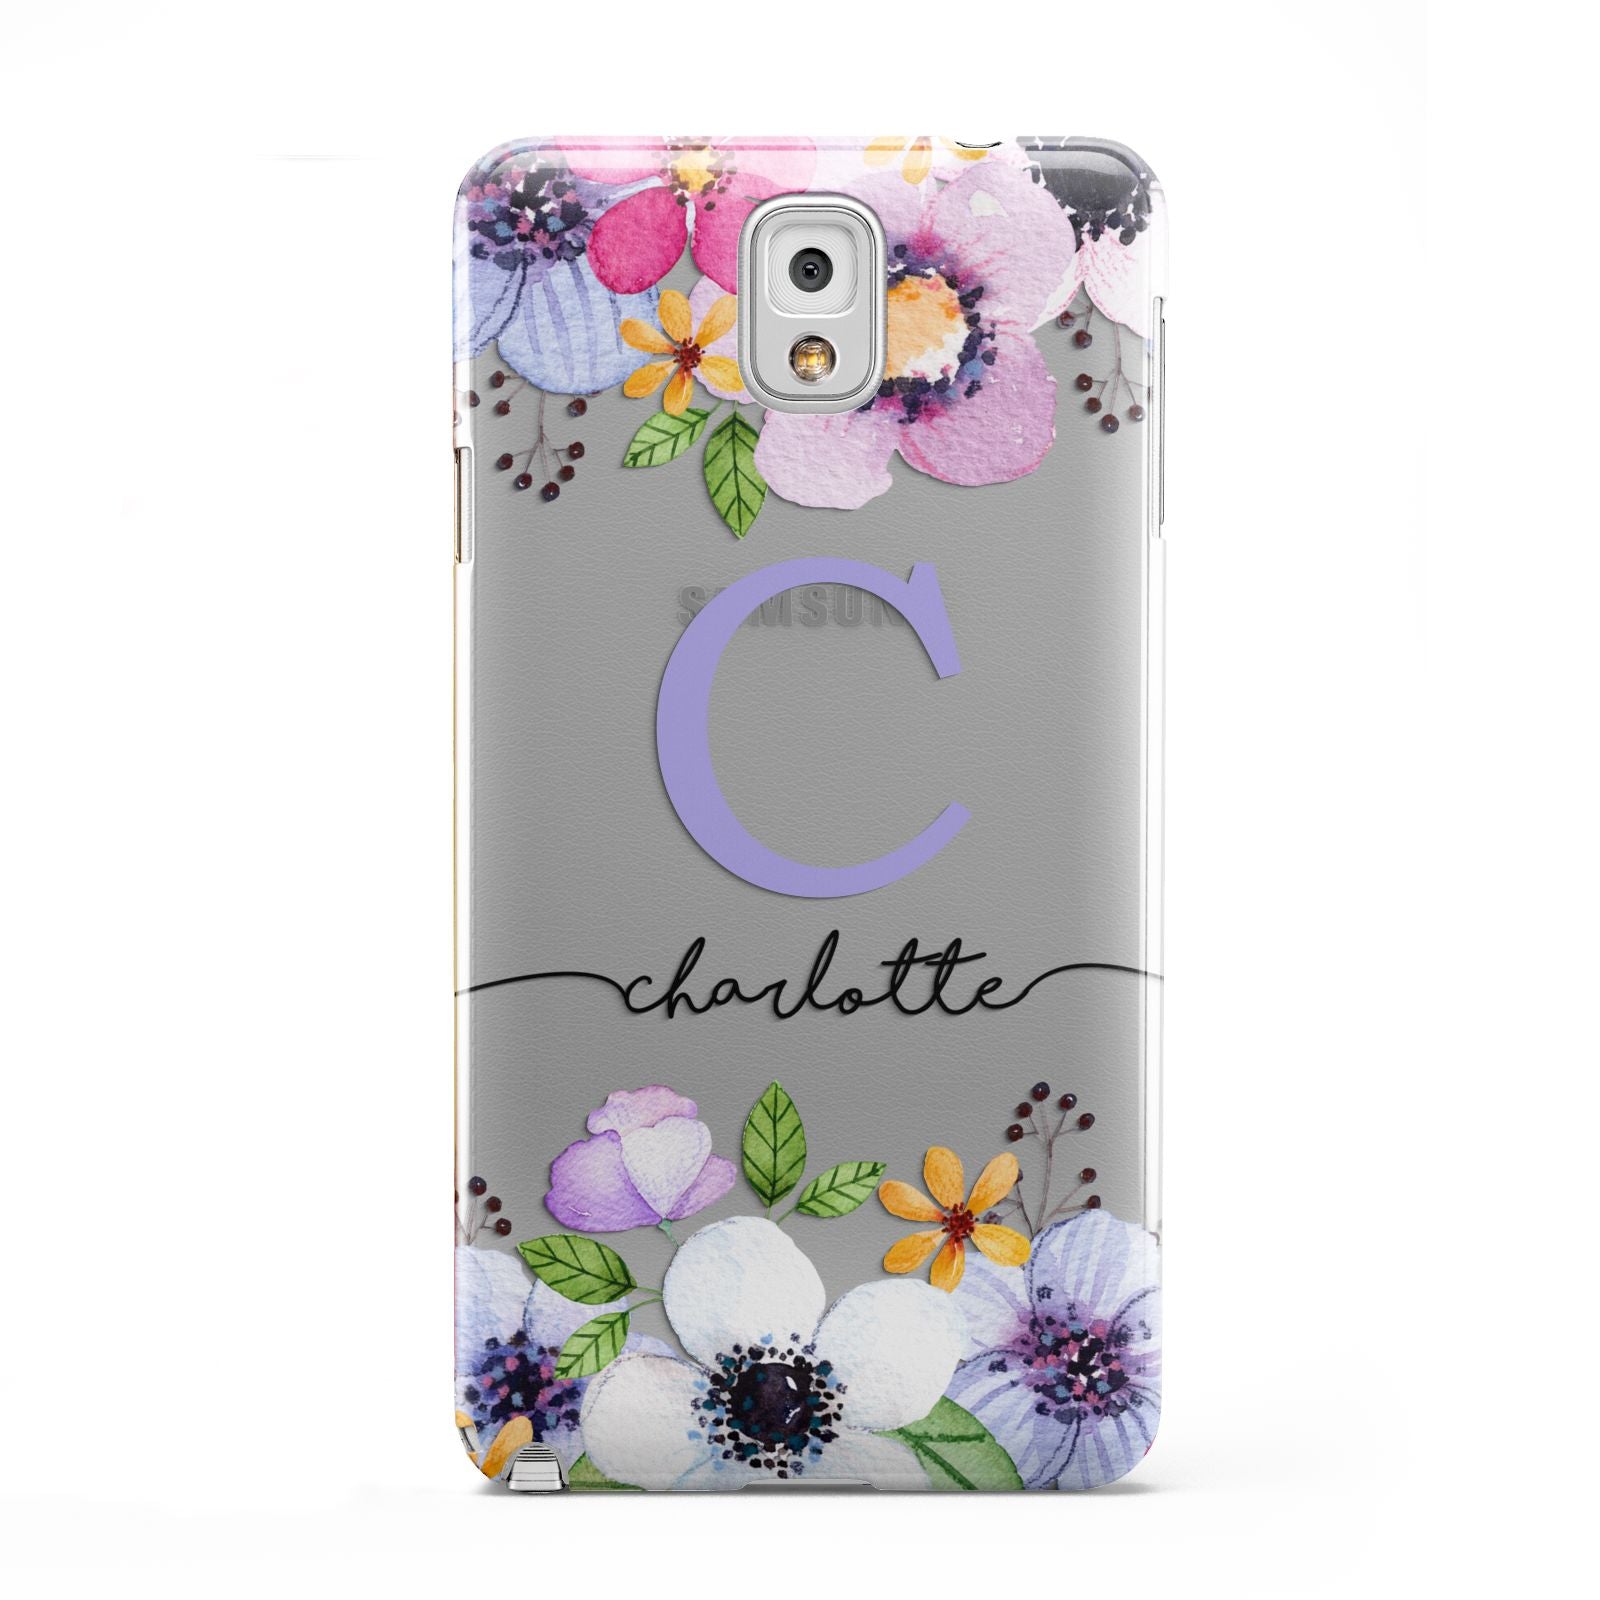 Personalised Violet Flowers Samsung Galaxy Note 3 Case